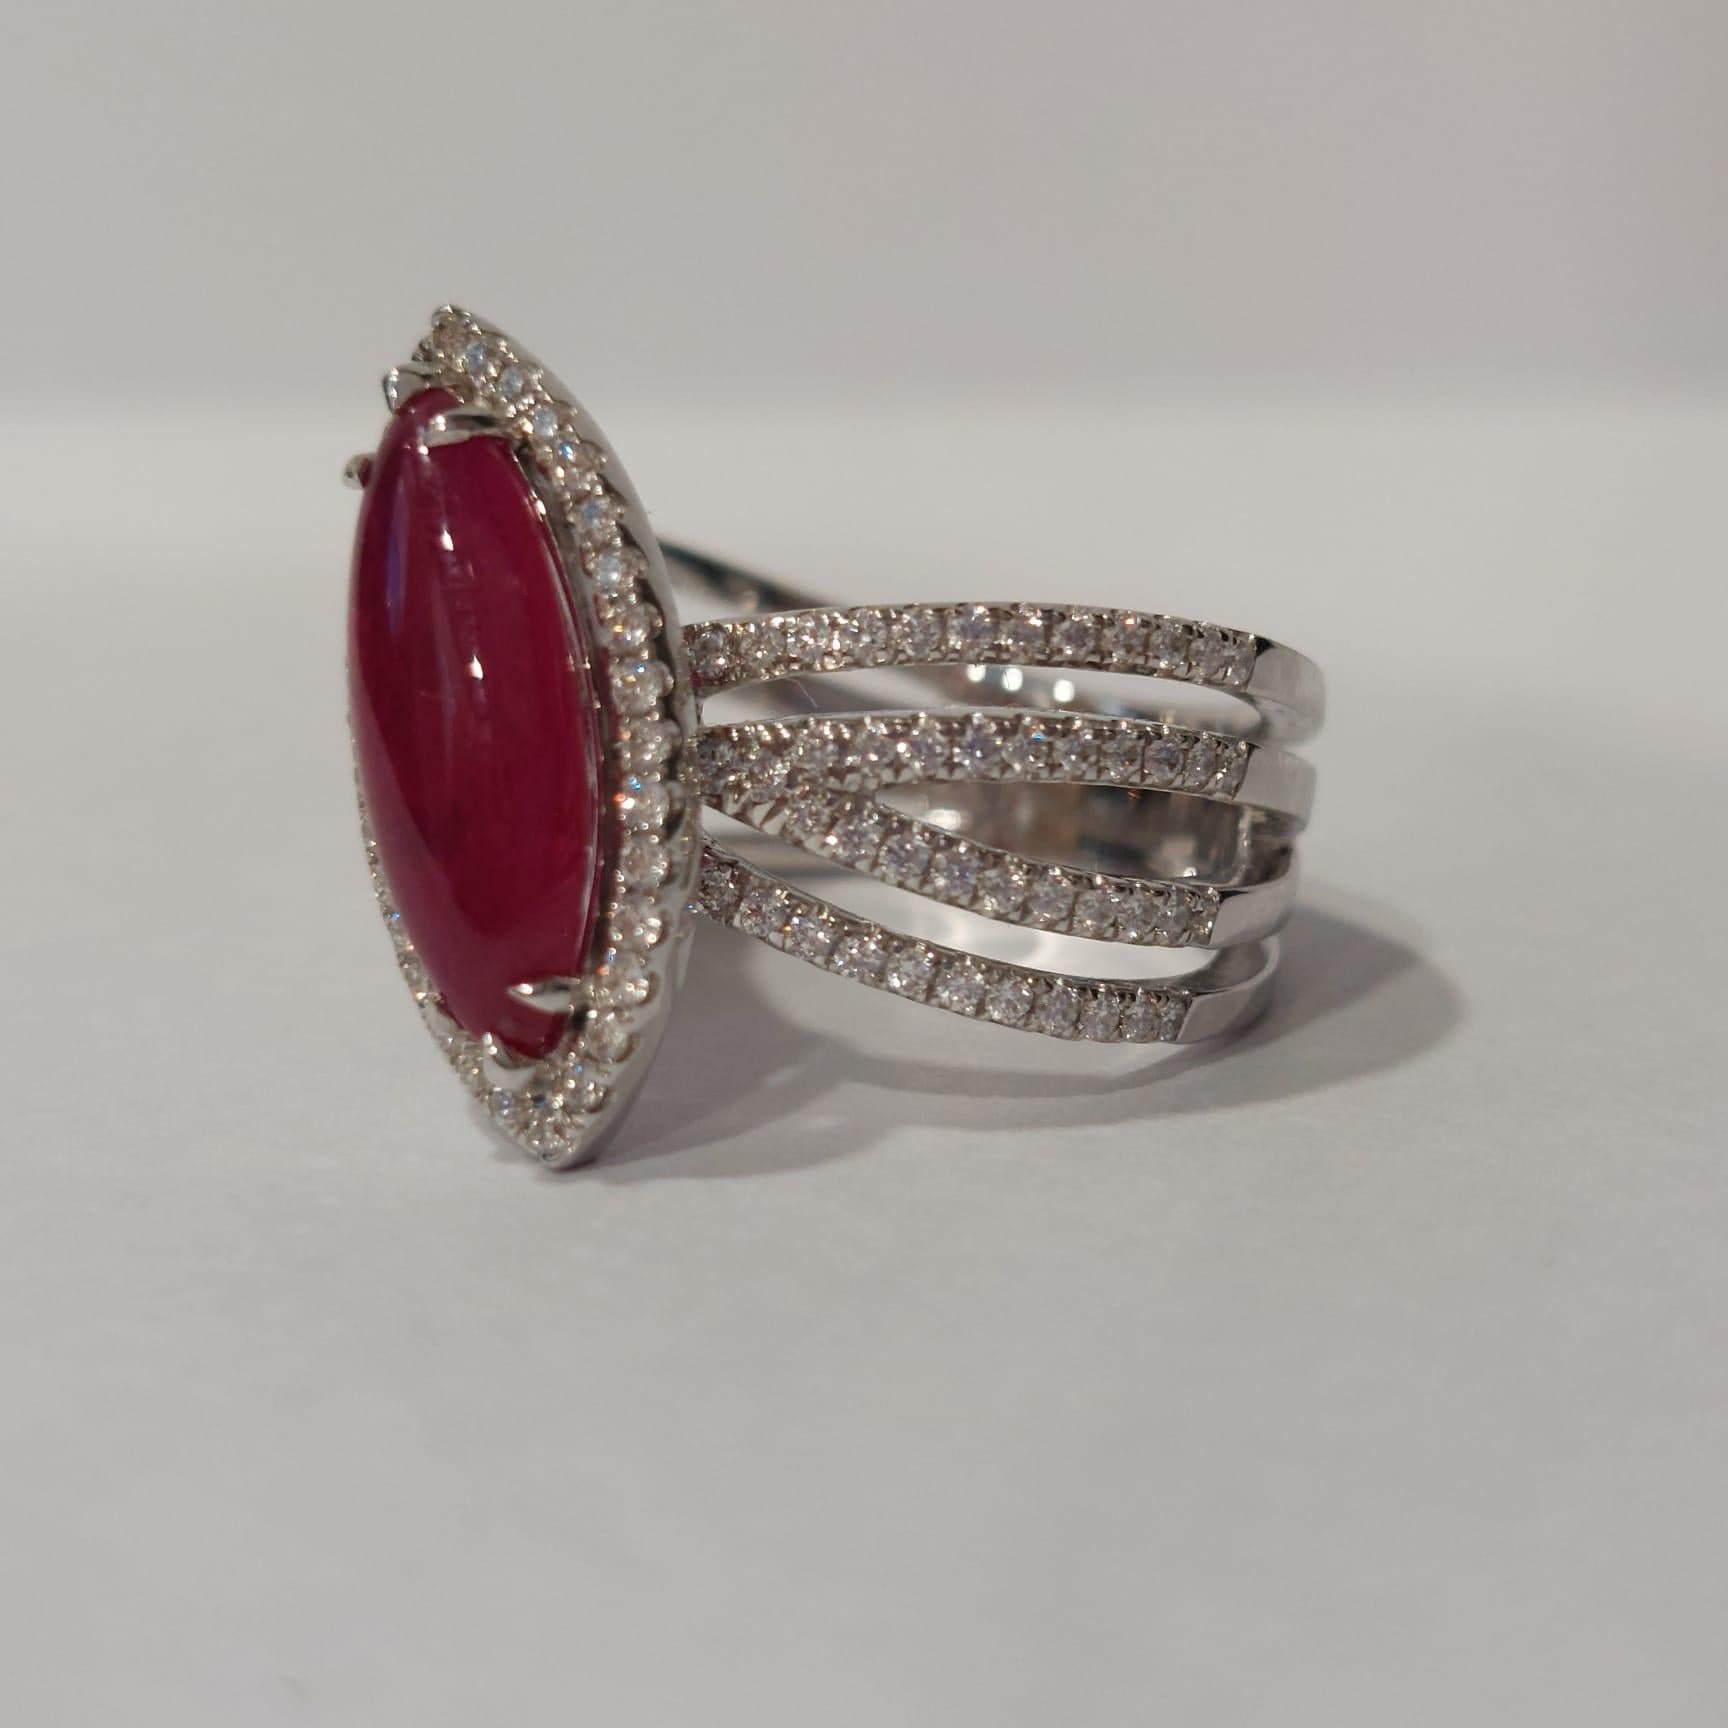 The ruby is known as a protective stone that can bring happiness and passion into the life of the wearer.

The center ruby weight is 2.76 carat, diamond total weight is 0.57 carat.
The ring made in 18K white gold and the ring size is US 6.5
